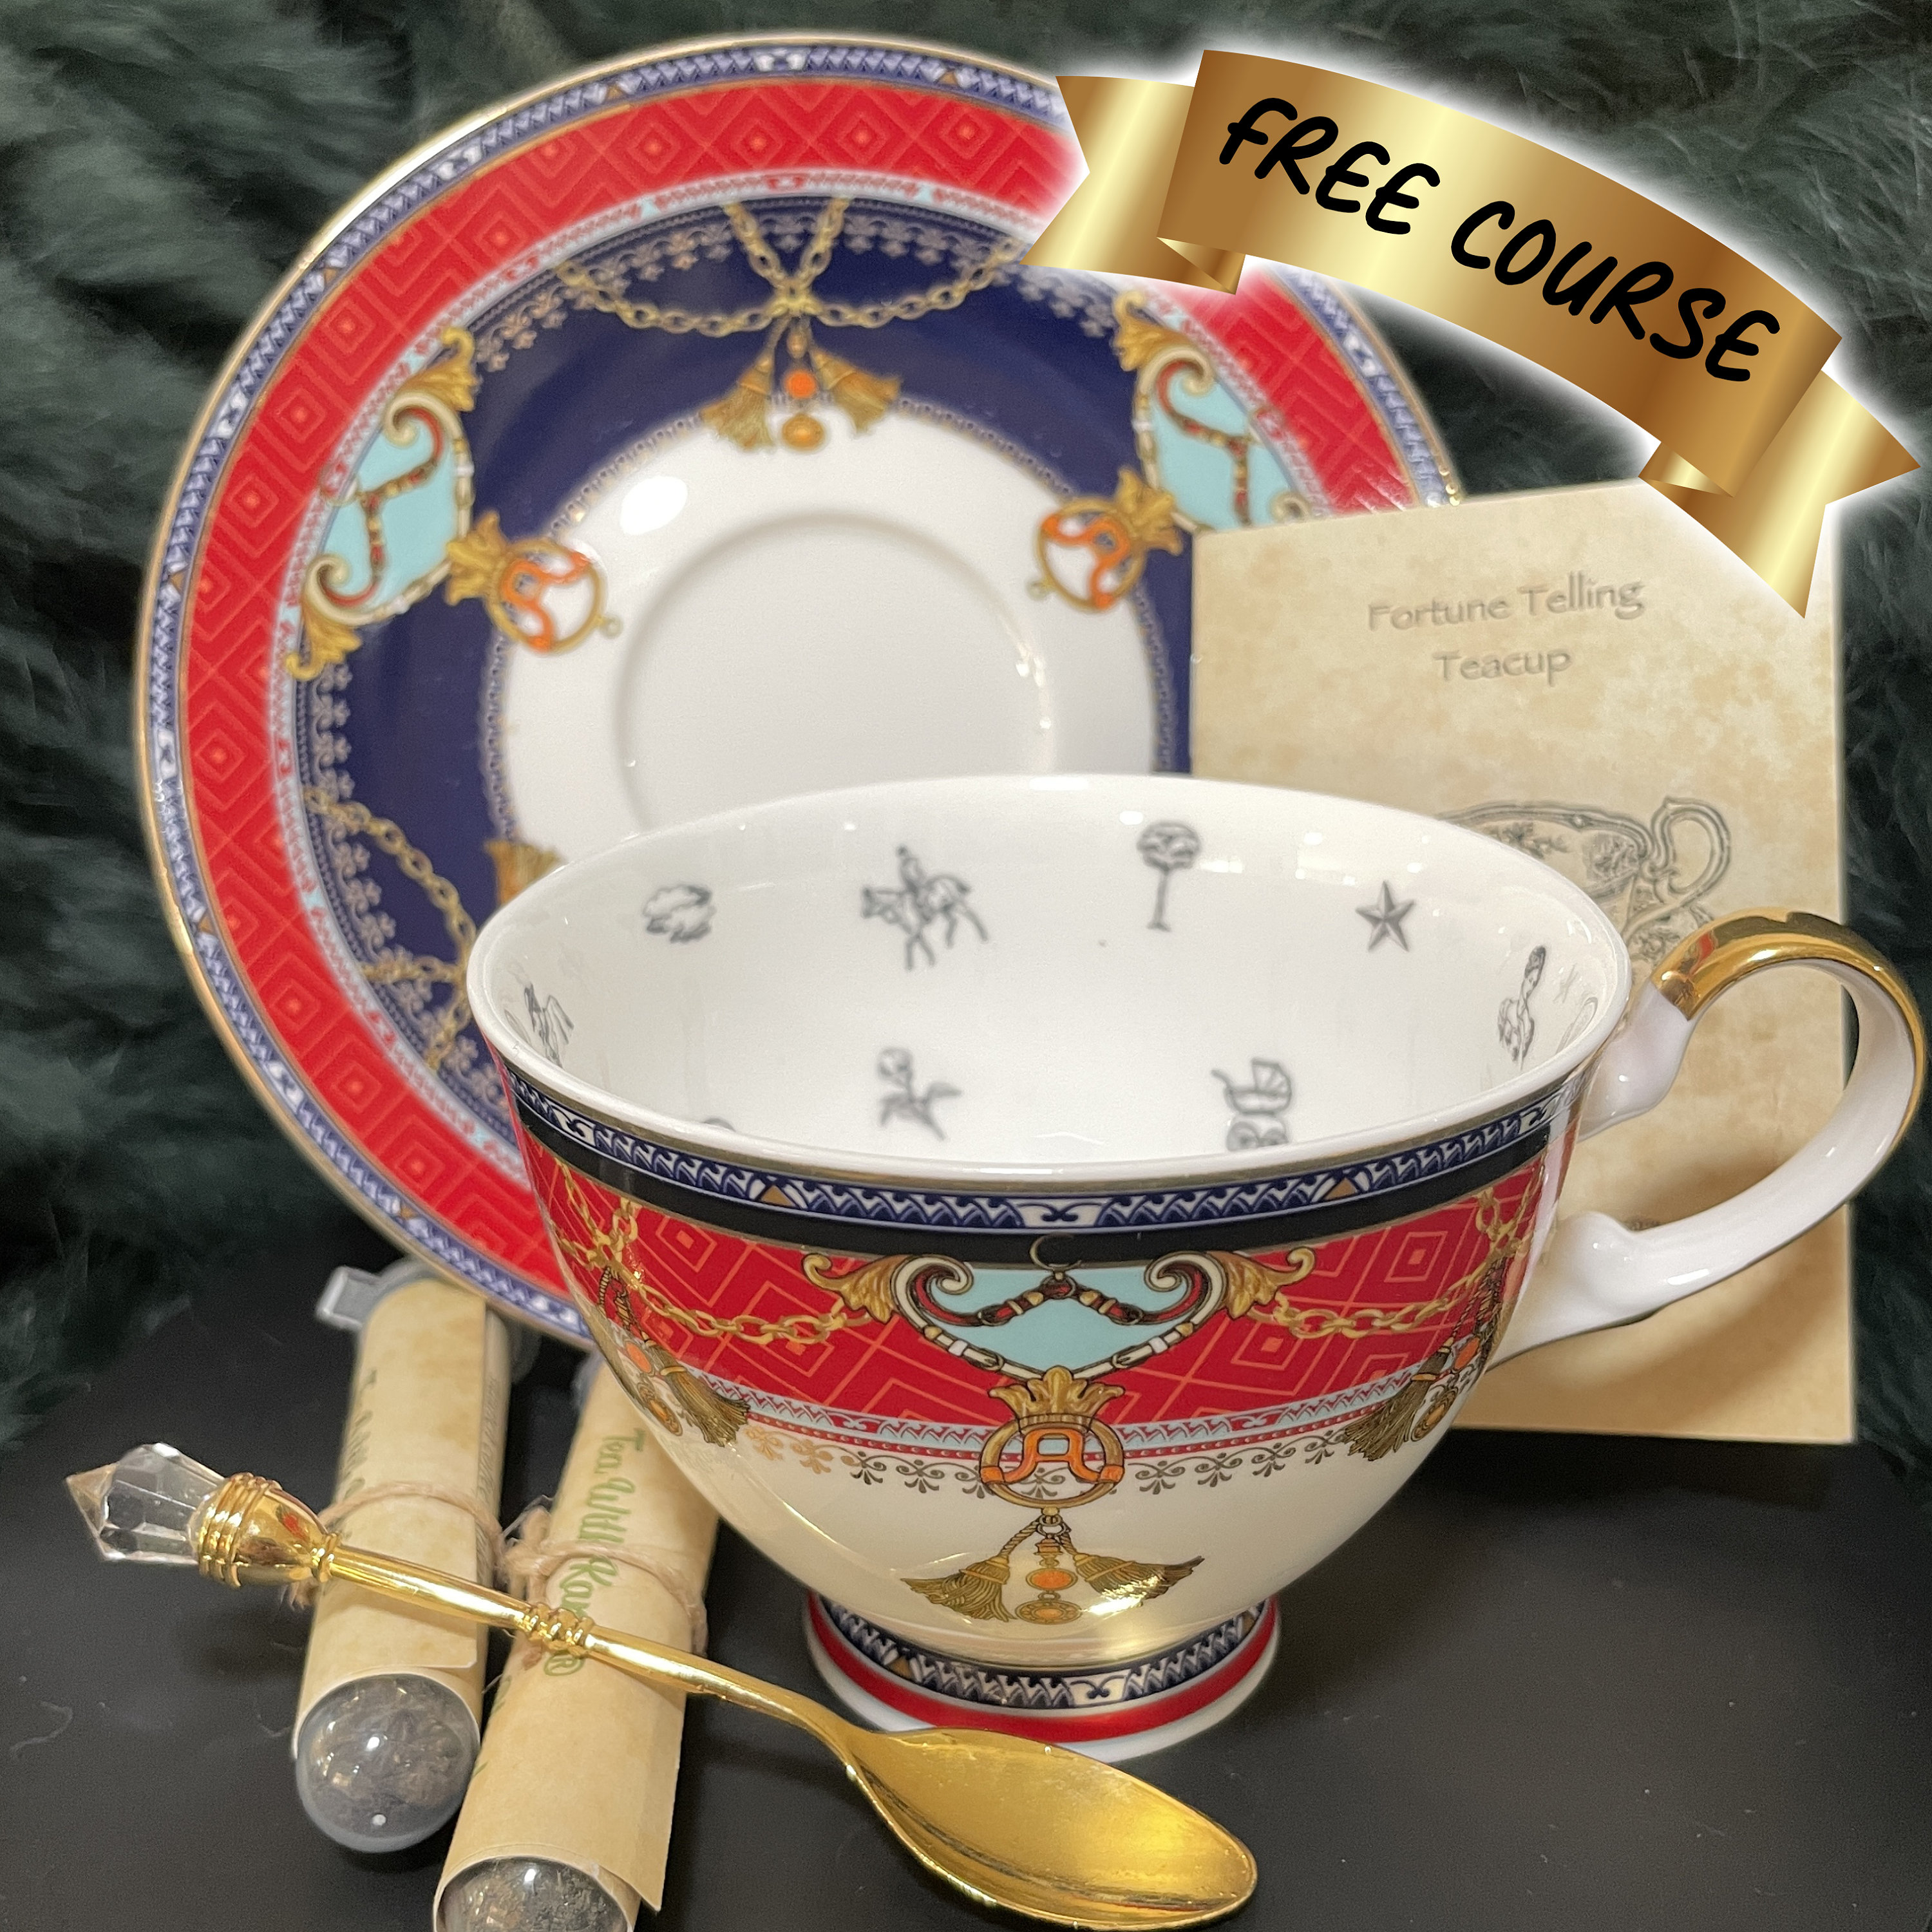 Brass Cup and Saucer Set for Tea Serving Engraving Luxury Tea Set